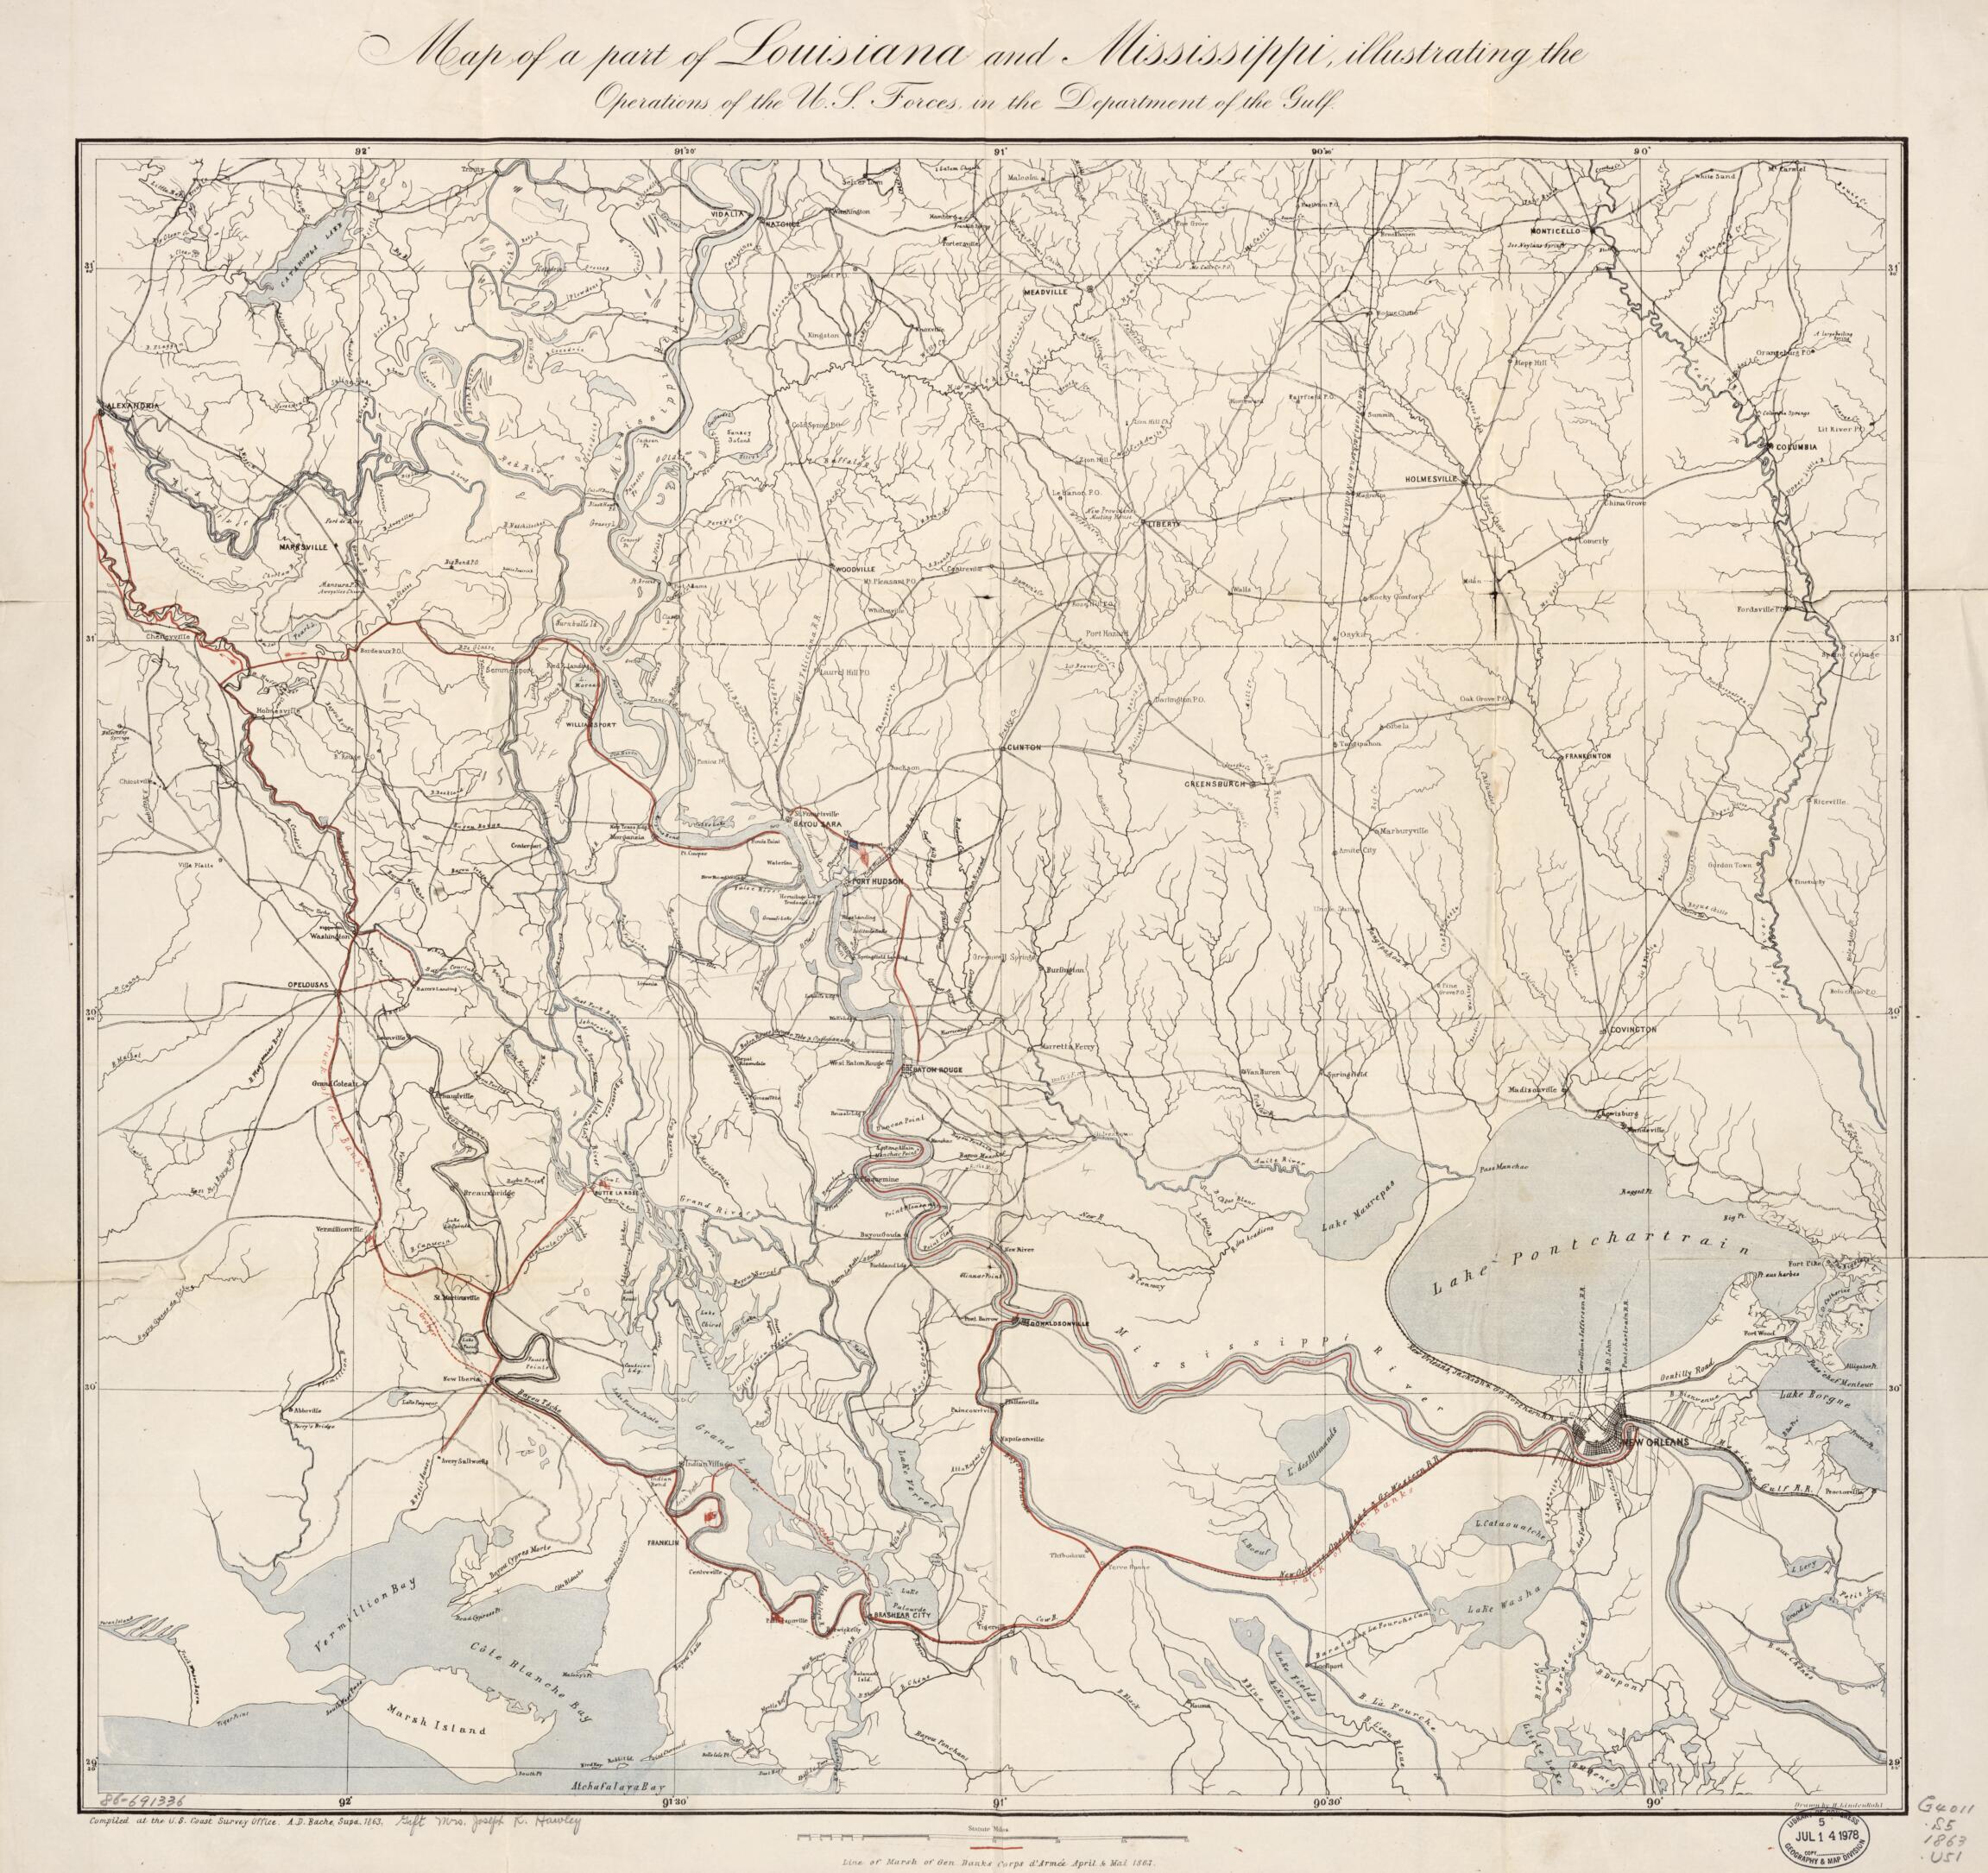 This old map of Map of a Part of Louisiana and Mississippi : Illustrating the Operations of the U.S. Forces In the Department of the Gulf from 1863 was created by A. D. (Alexander Dallas) Bache, Joseph R. (Joseph Roswell) Hawley, H. (Henry) Lindenkohl,  